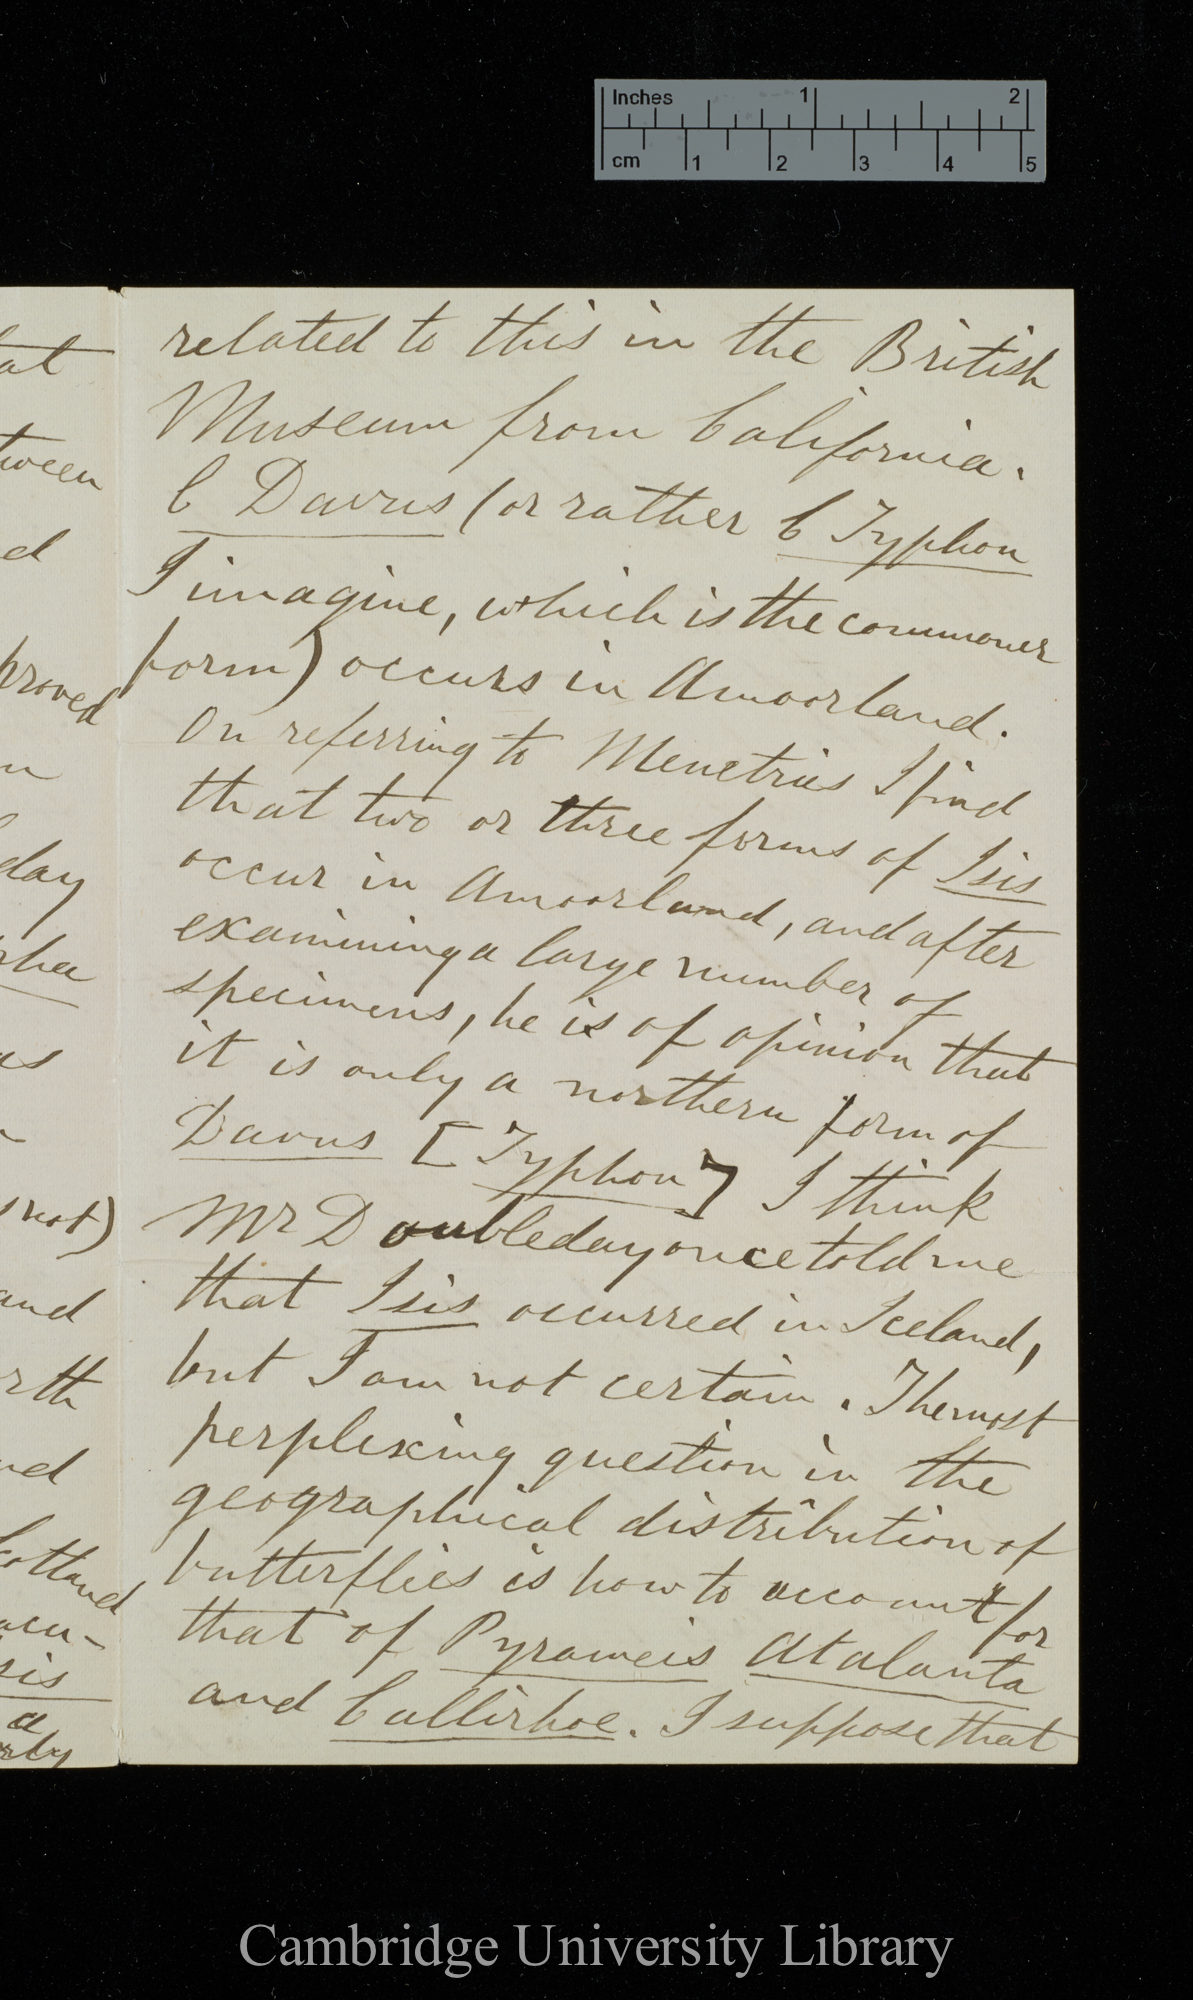 William Forsell Kirby to Charles Robert Darwin